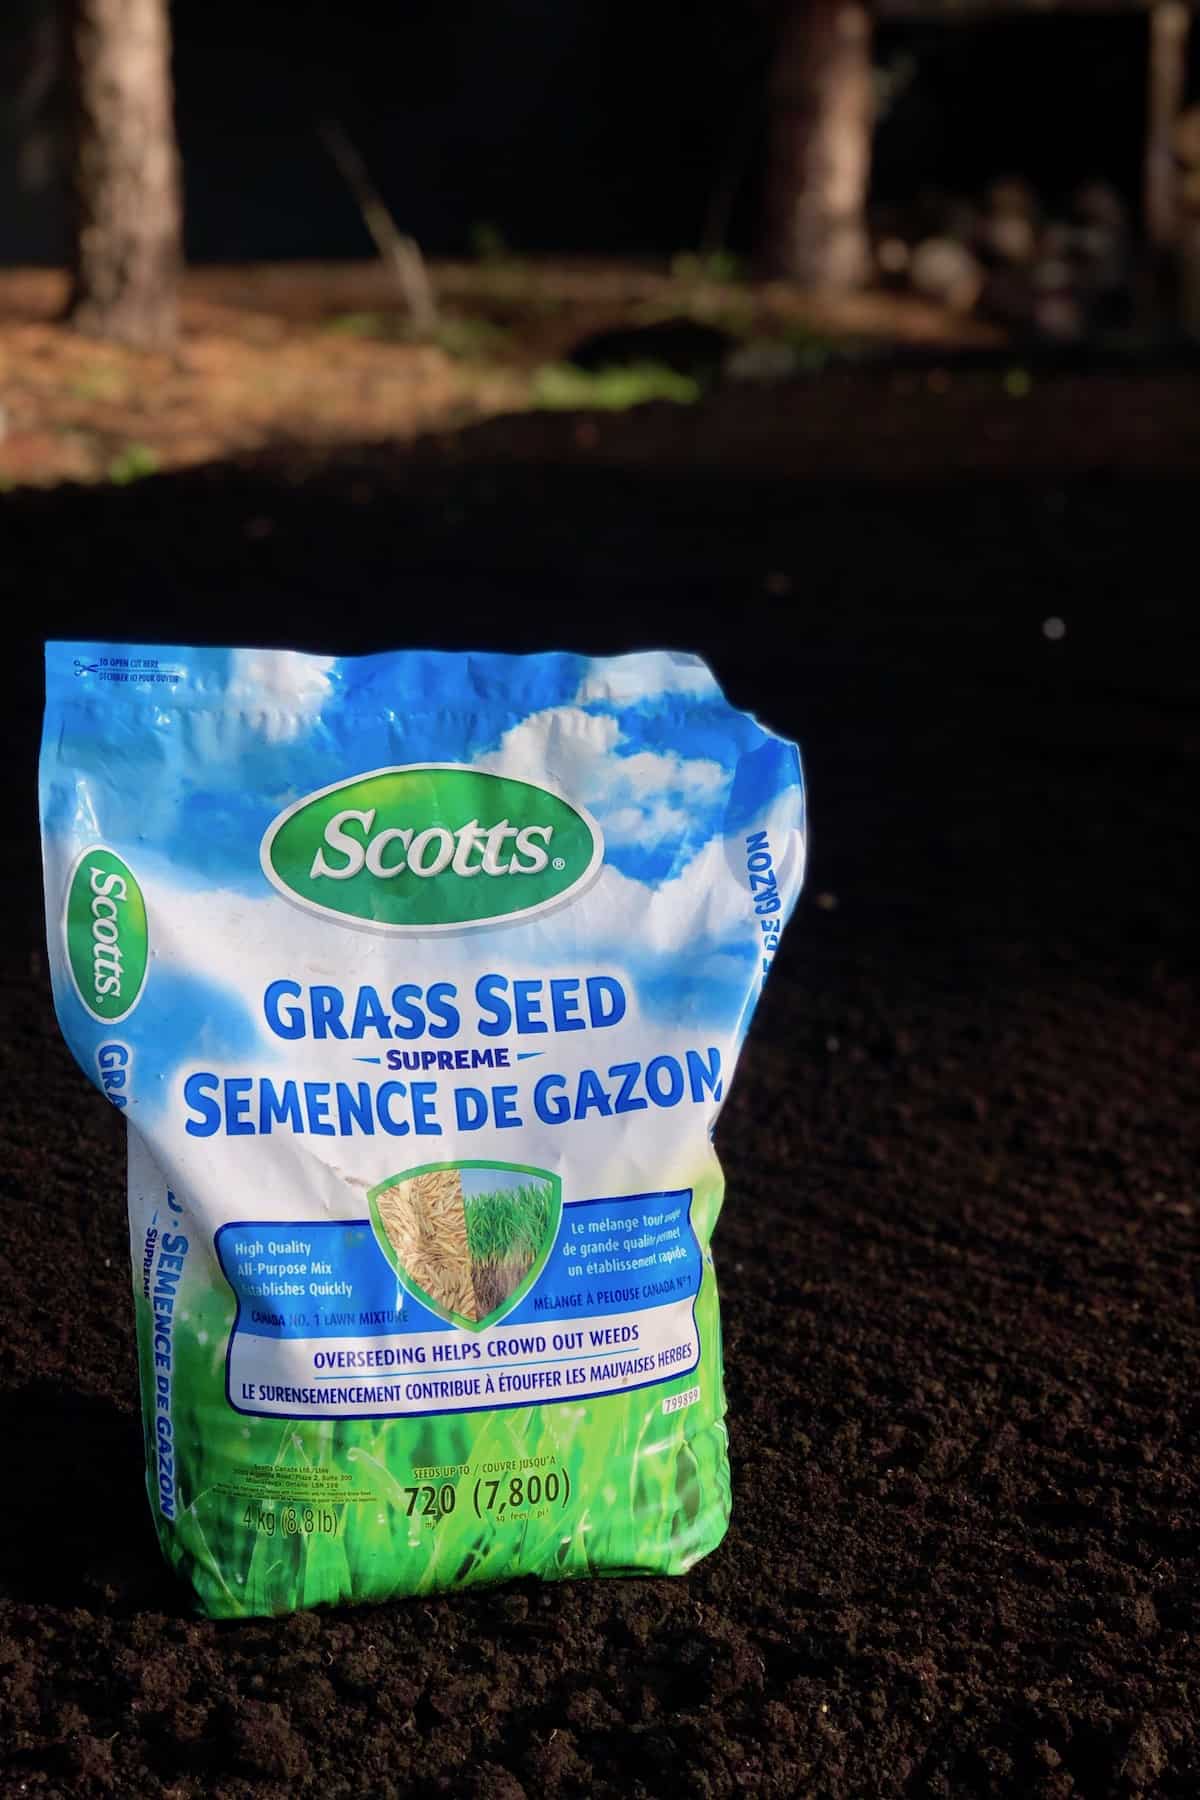 Planting Grass Seed on Bad Soil - Bring In Good Topsoil